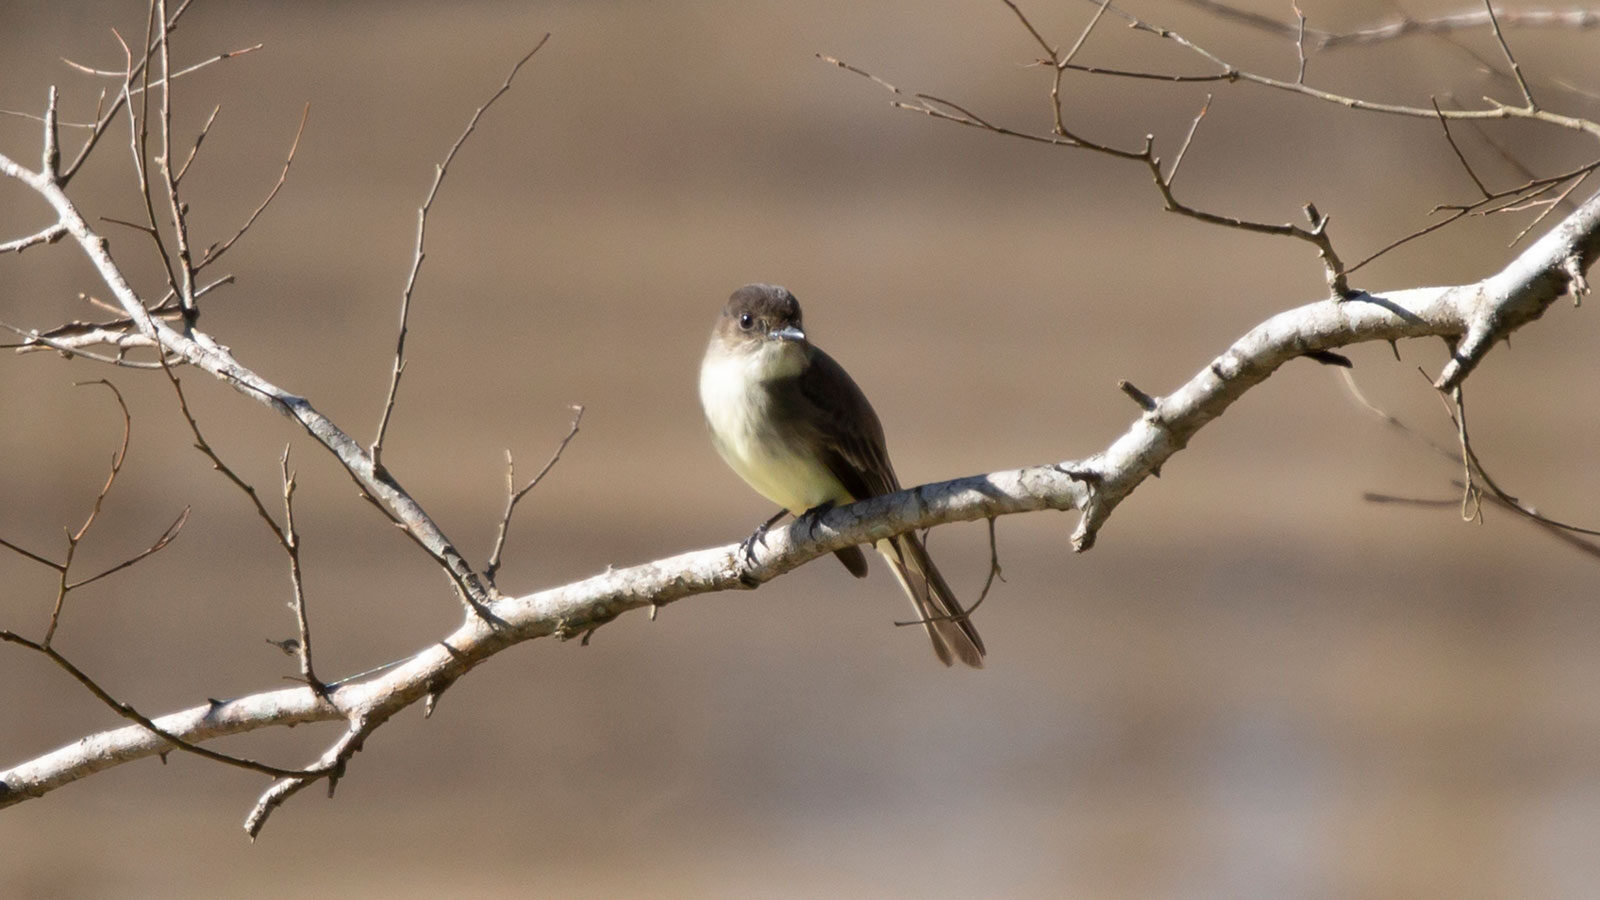 Eastern phoebe looking around from its perch above water